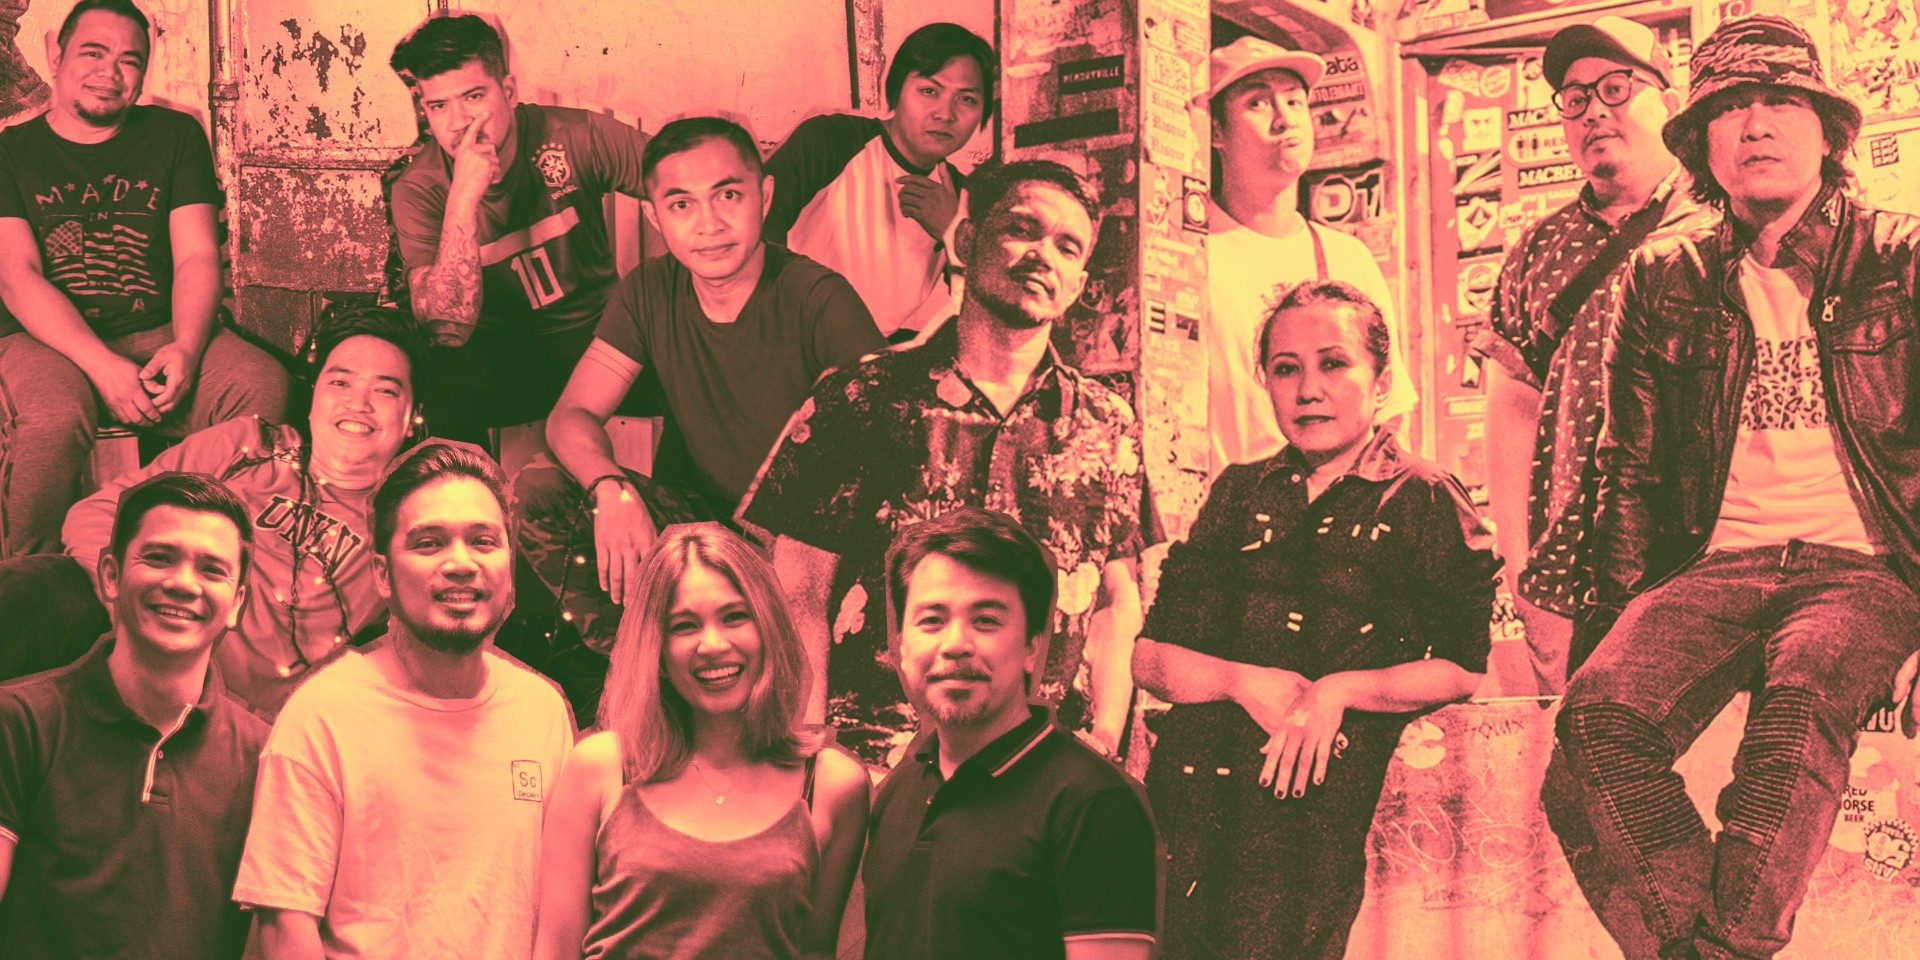 Sandwich, Moonstar88, and Banda Ni Kleggy welcome December with new tunes and Christmas cheer – listen